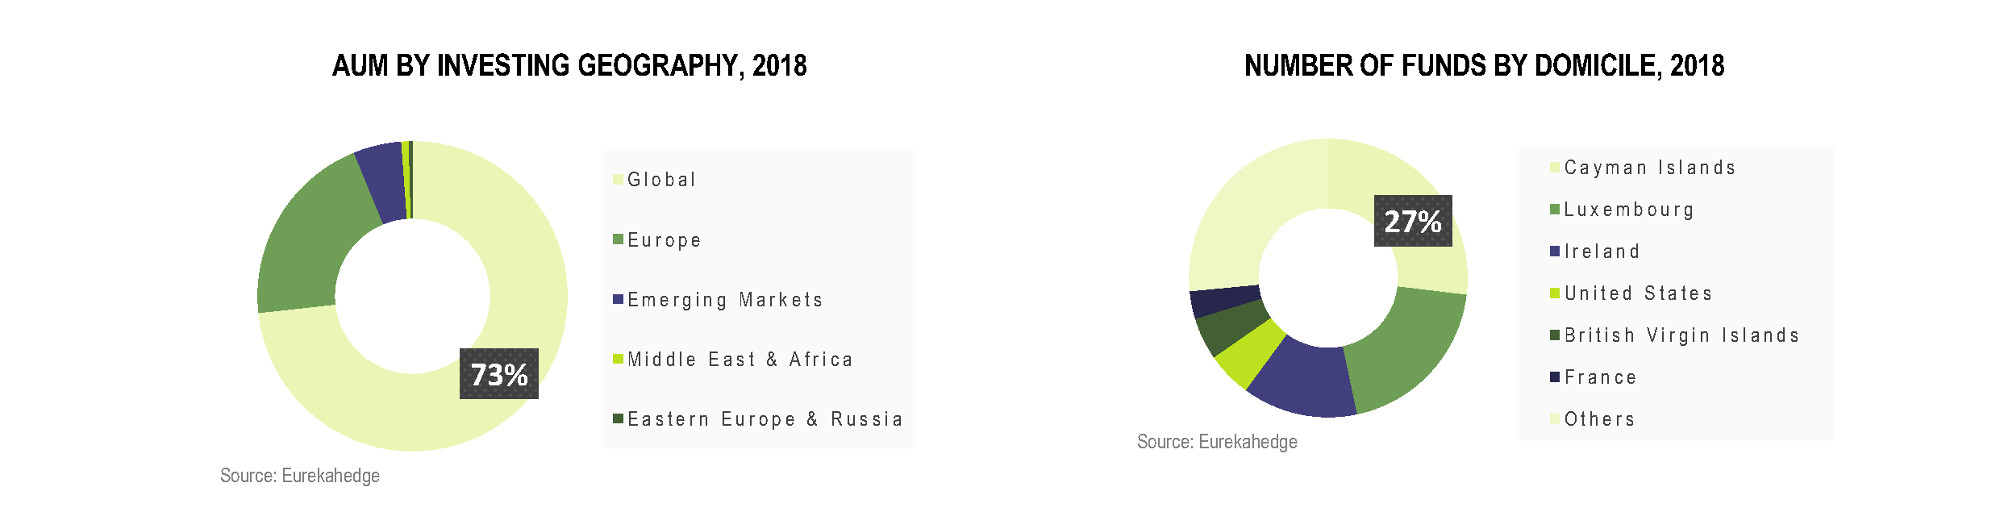 European Hedge Funds Infographic July 2018 - aum by investing geography, number of funds by domicile